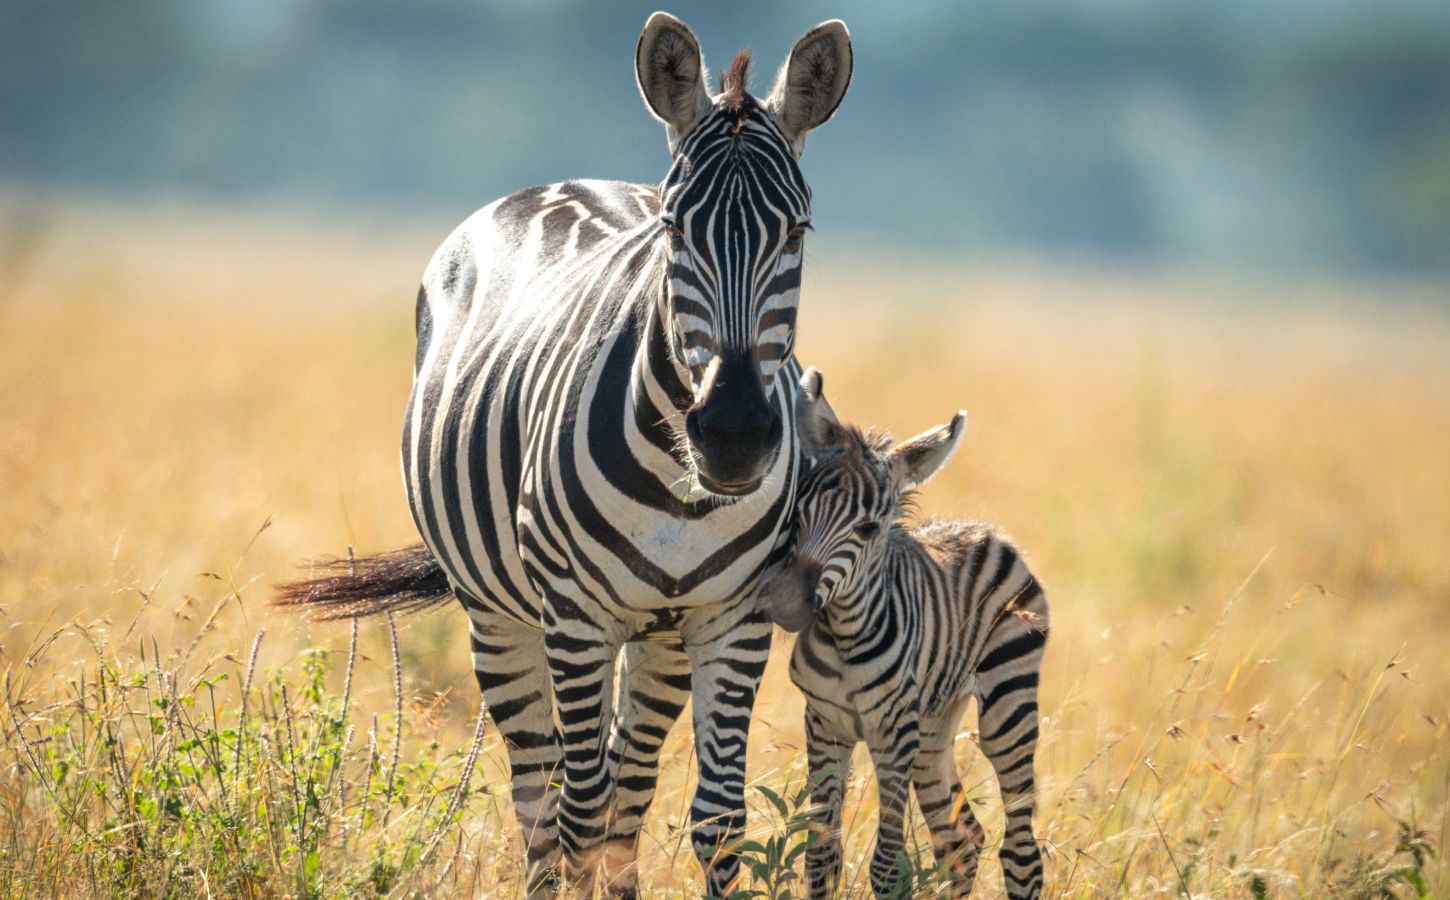 A zebra and her calf looking at the camera